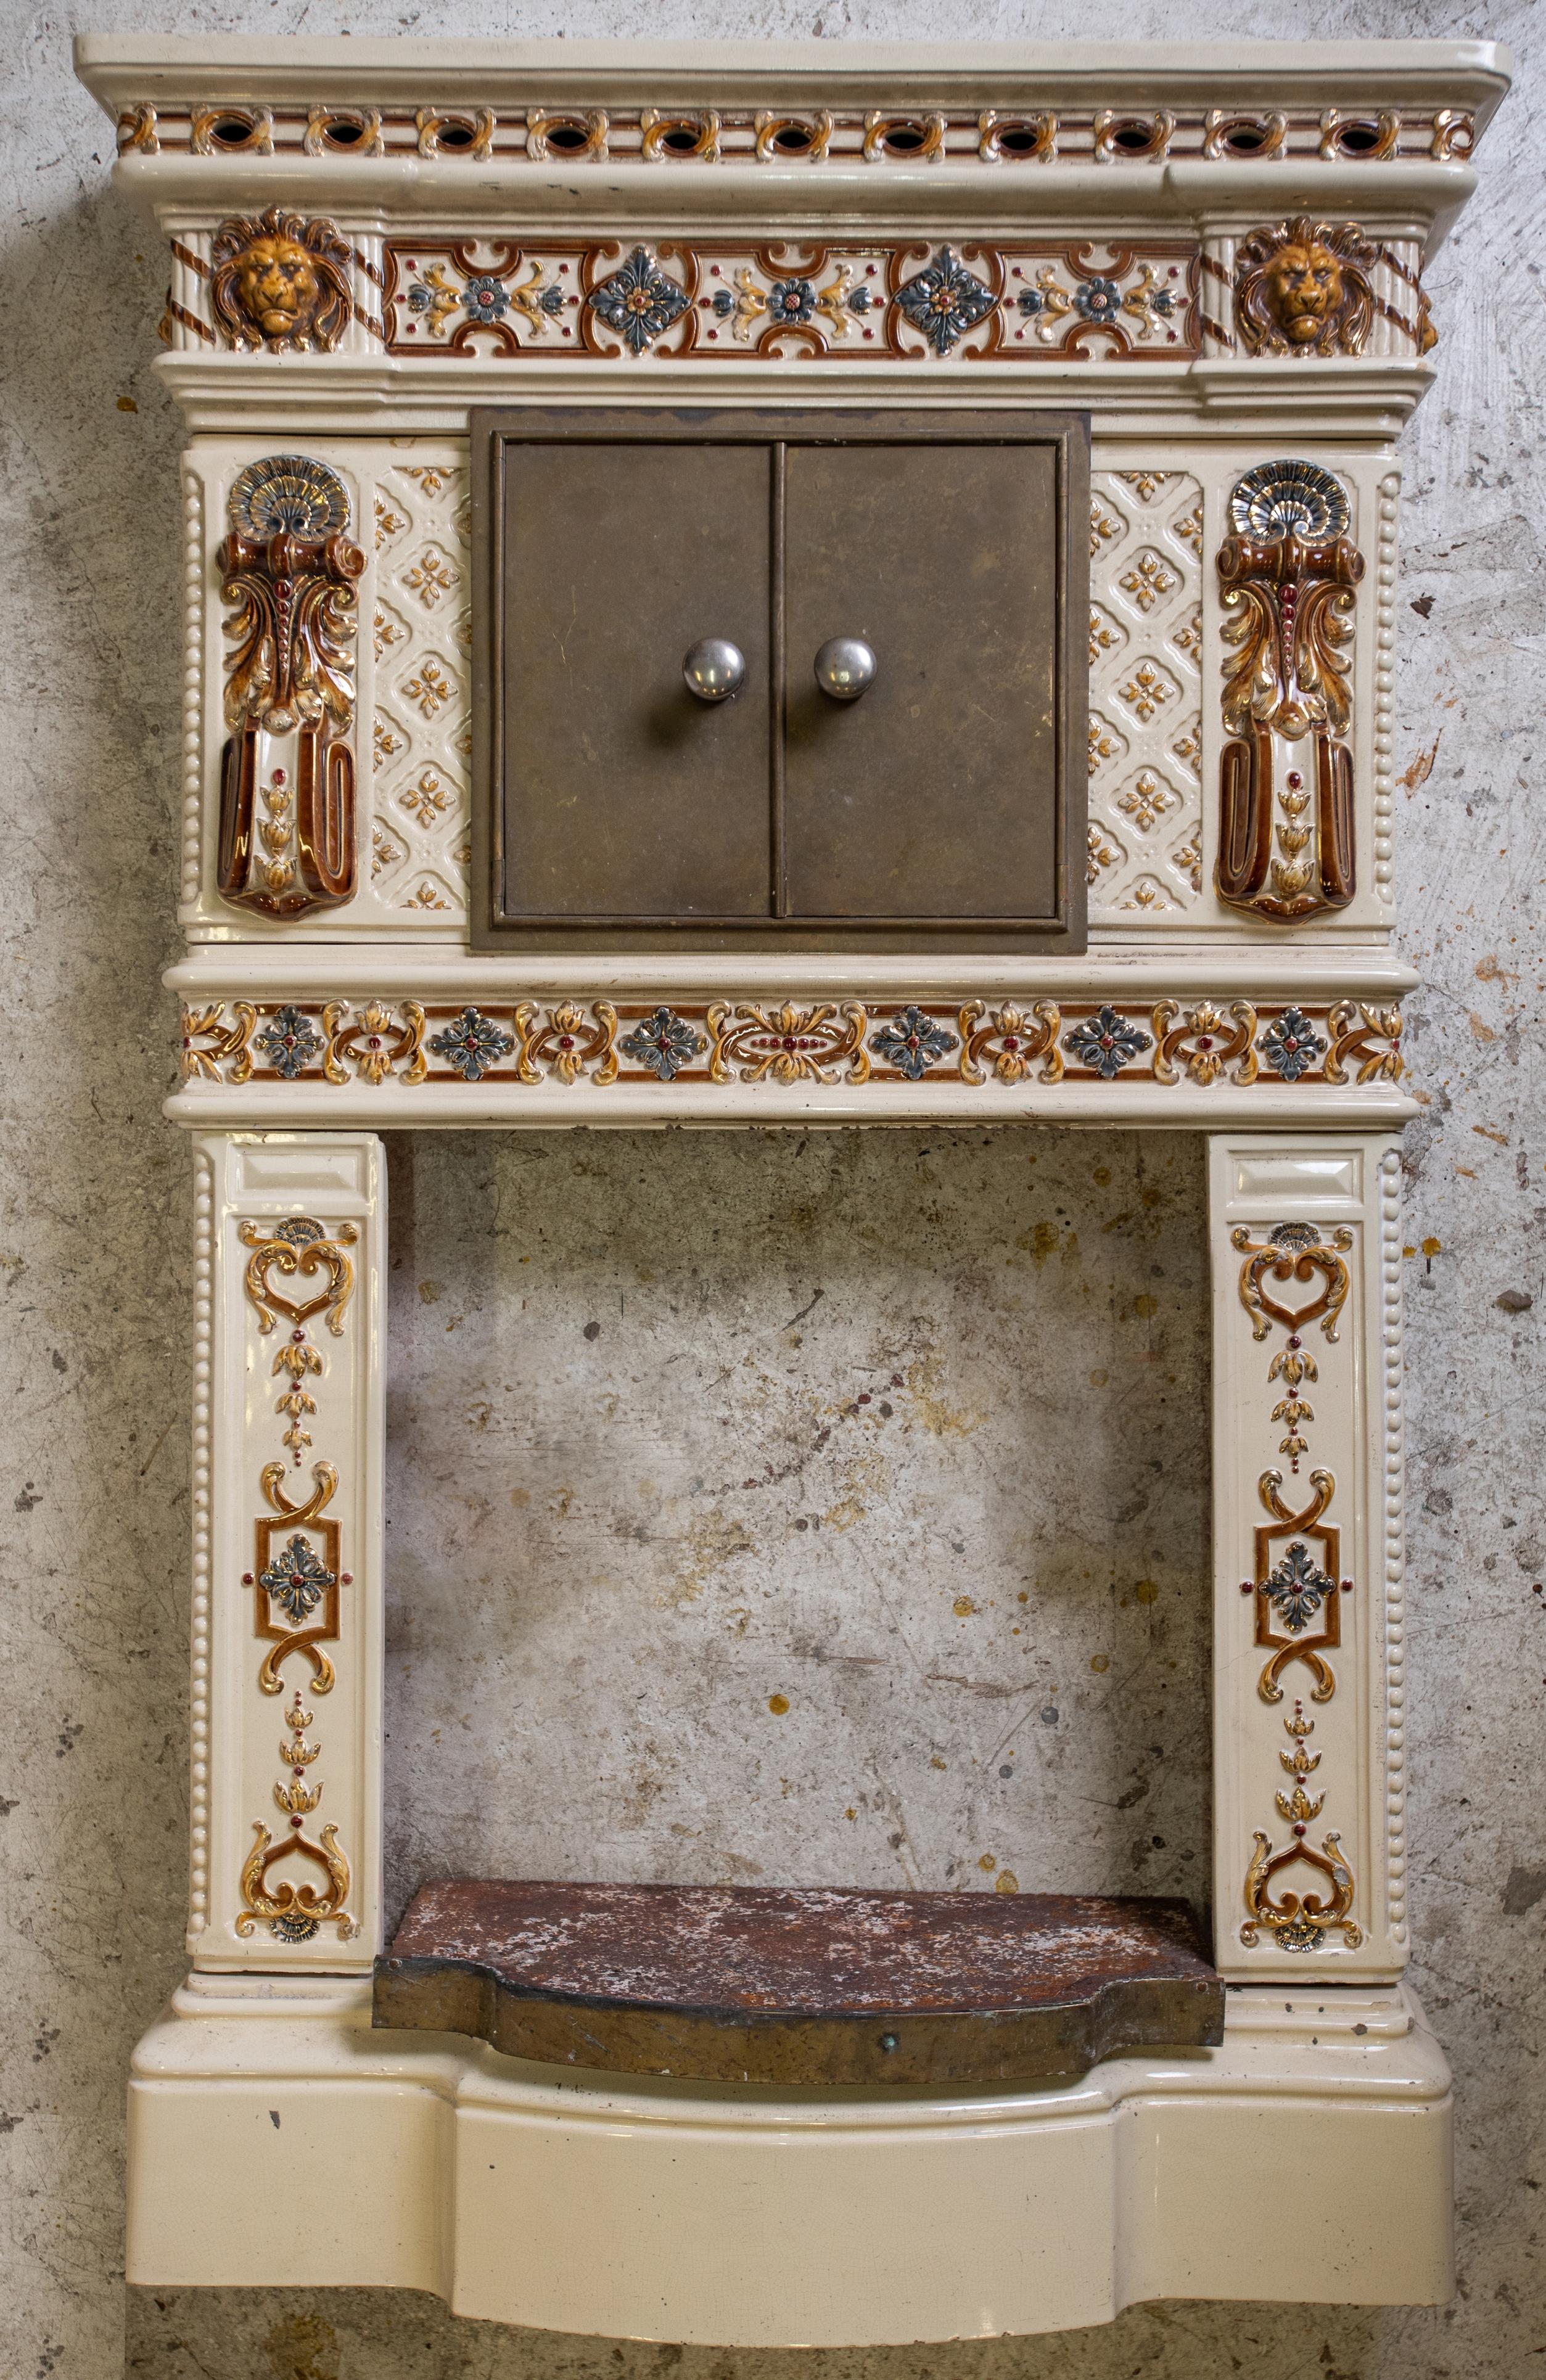 Beautiful Prussian fireplace in Sarreguemines enameled earthenware, with enamelled decoration of flowers, arabesques and lion's muzzle. 
With a hearth base made of cast iron.
The warming doors are made of brass. 

Measures: Height: 54.14